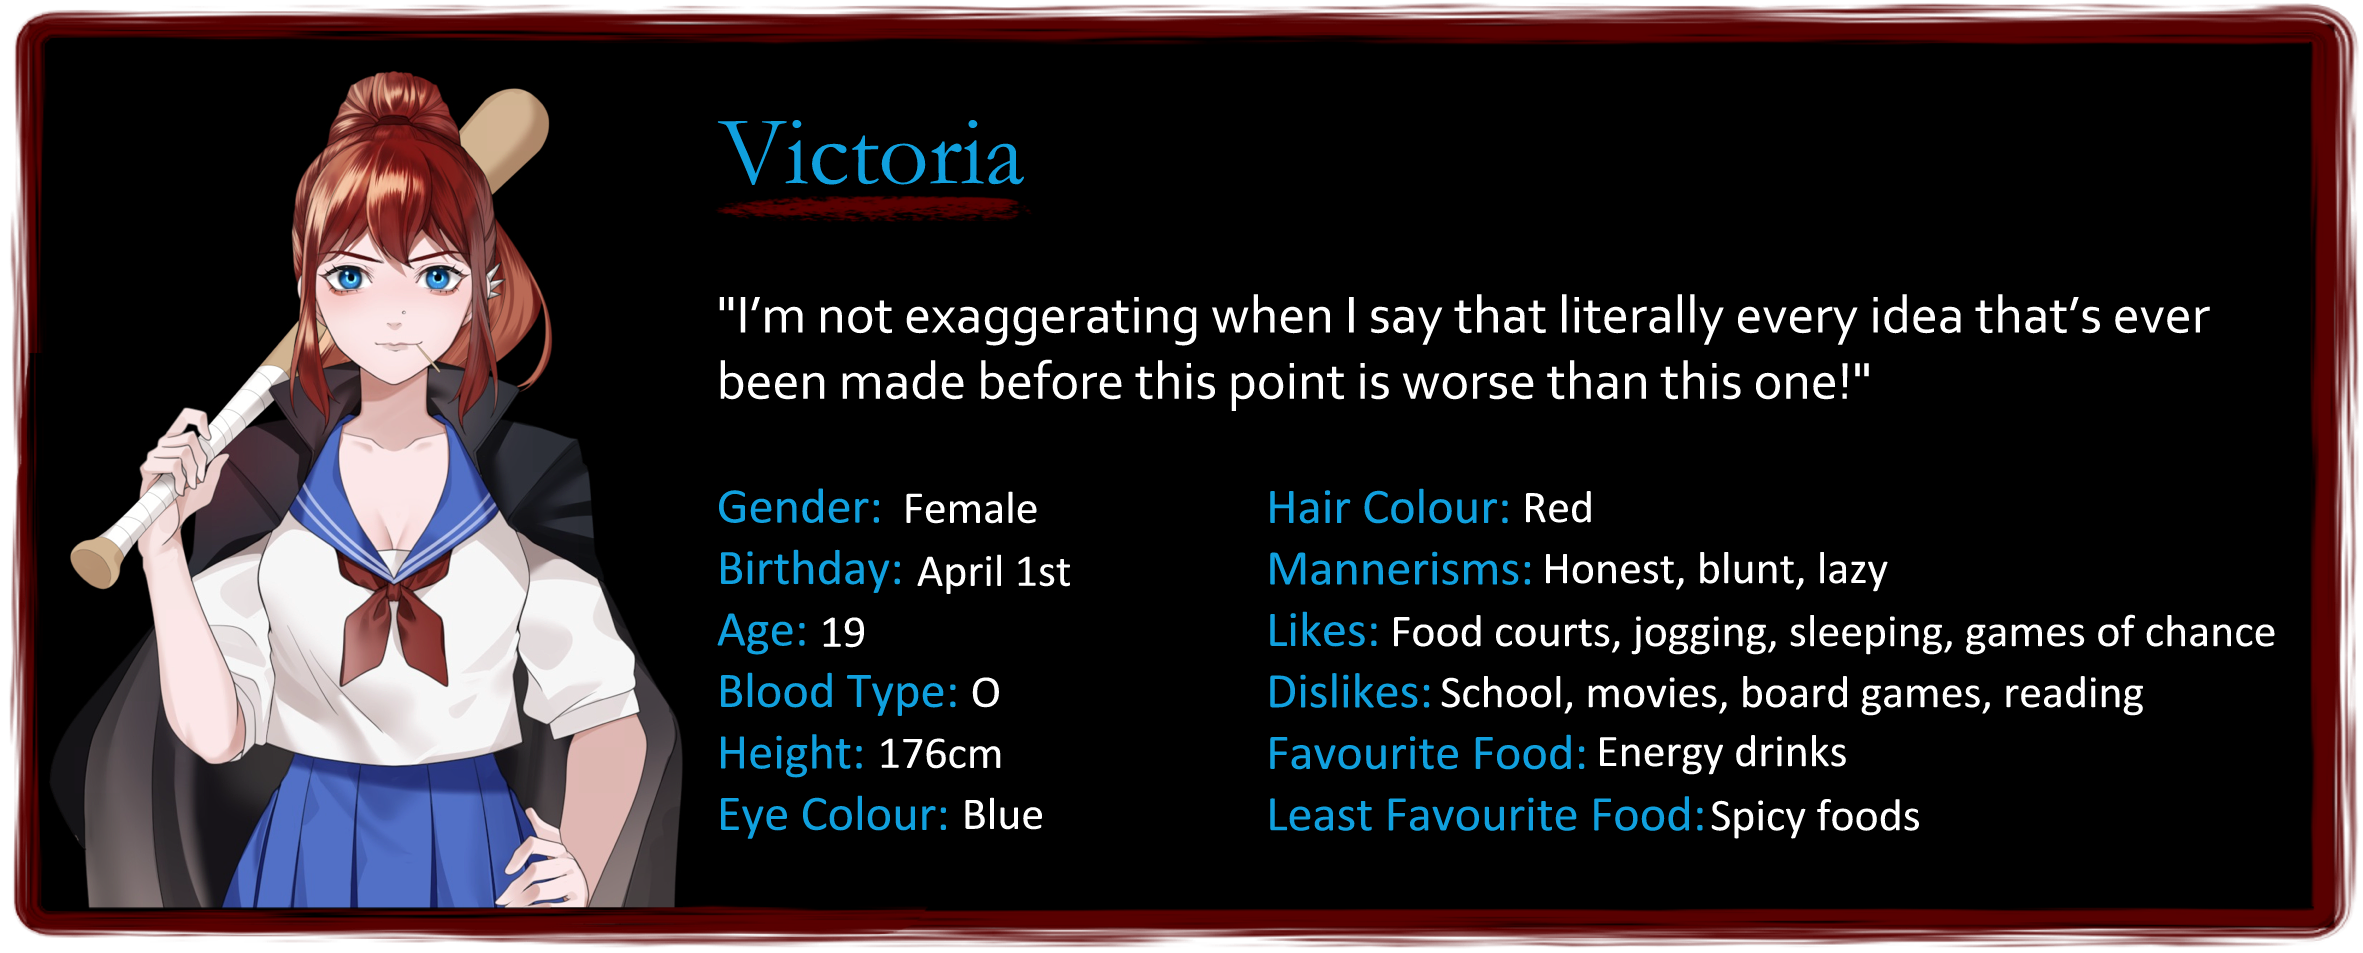 A profile card containing information about Victoria, one of the characters in The Many Deaths of Lily Kosen